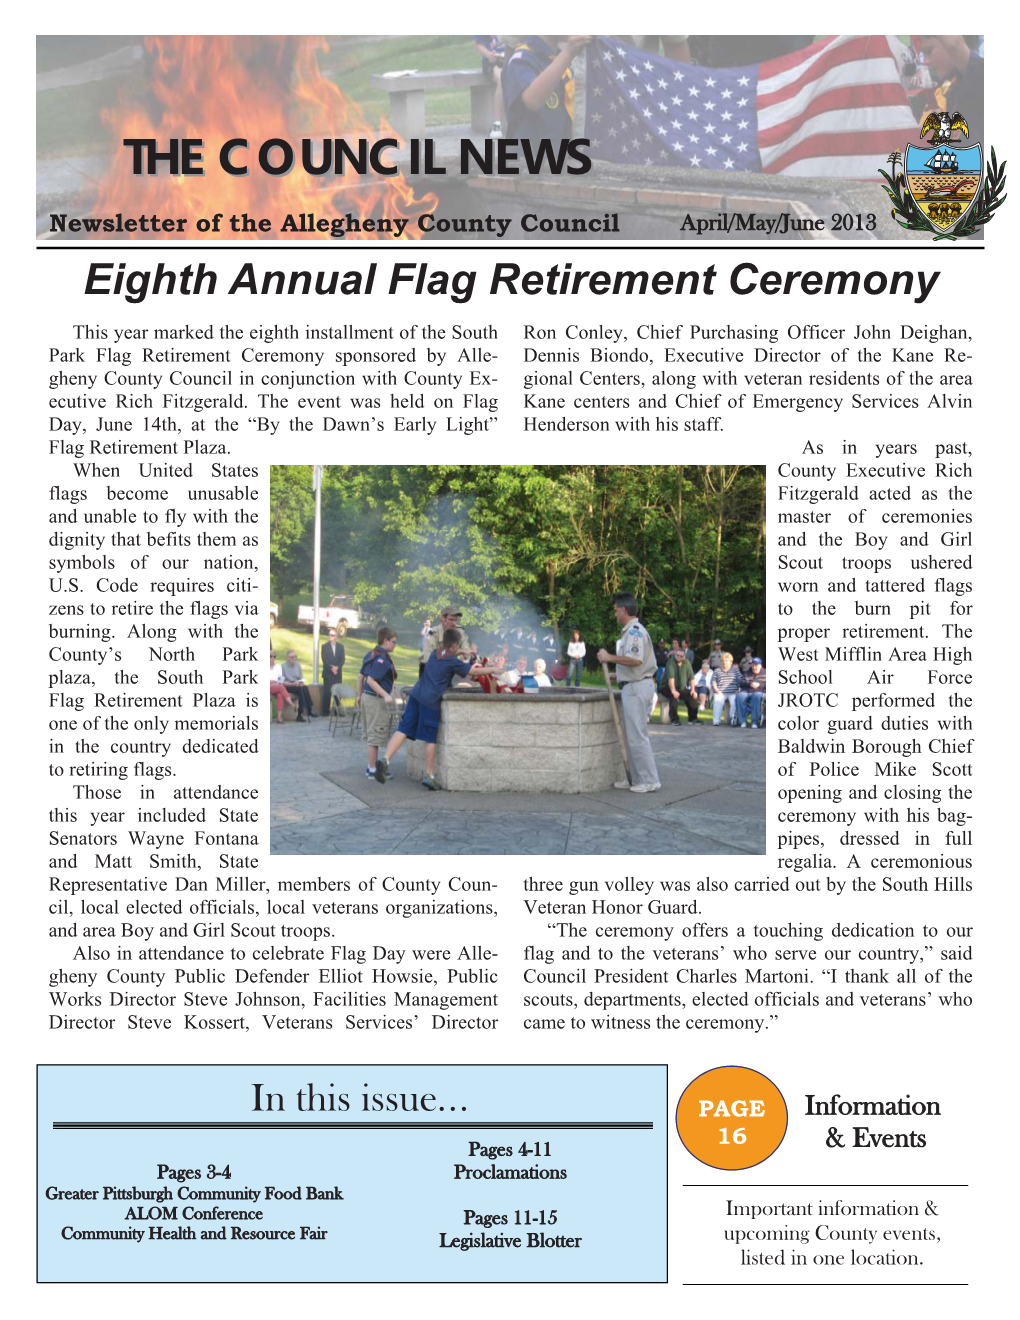 The Council News